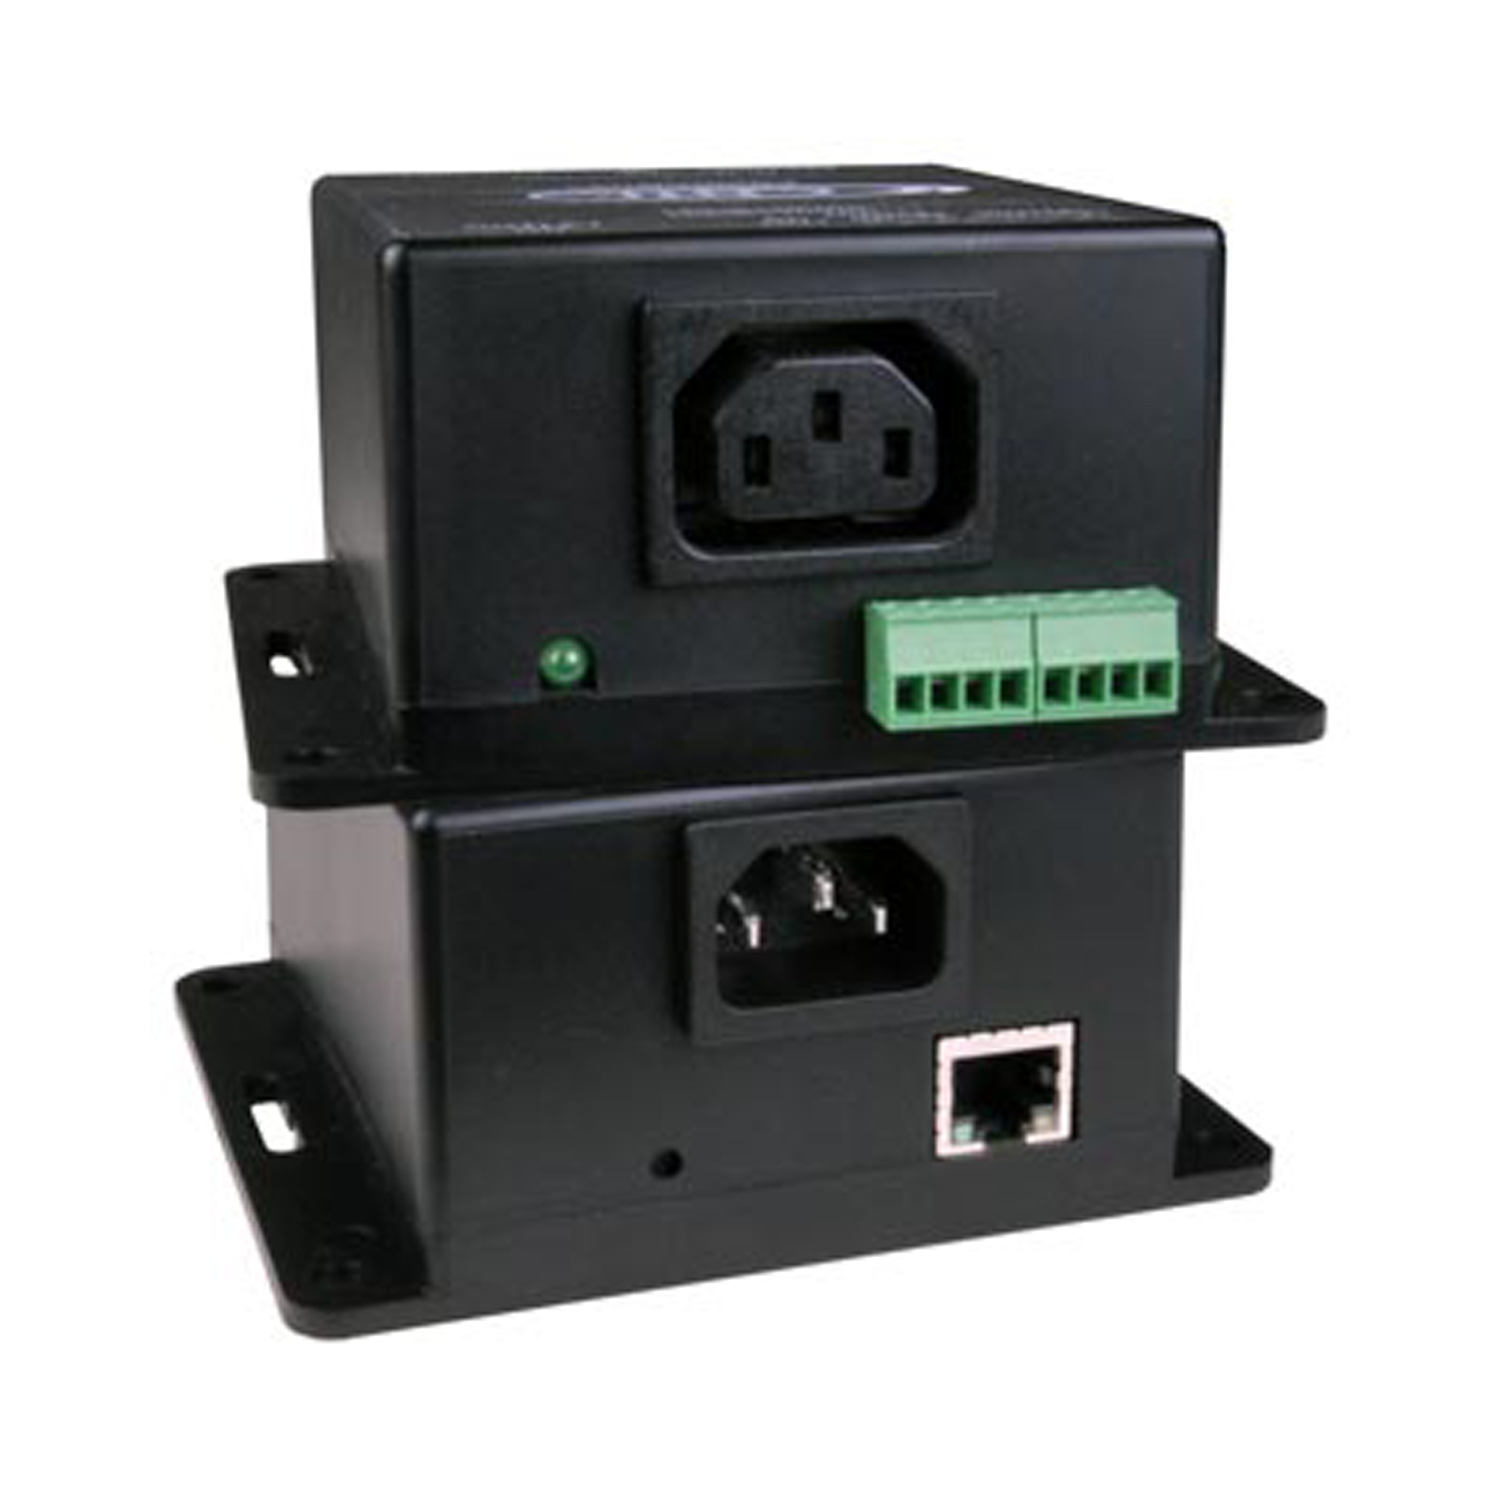 NTI PWR-RMT-RBT-C13-D Low-Cost Remote Power Reboot Switch w/ IEC320 C13  Outlet